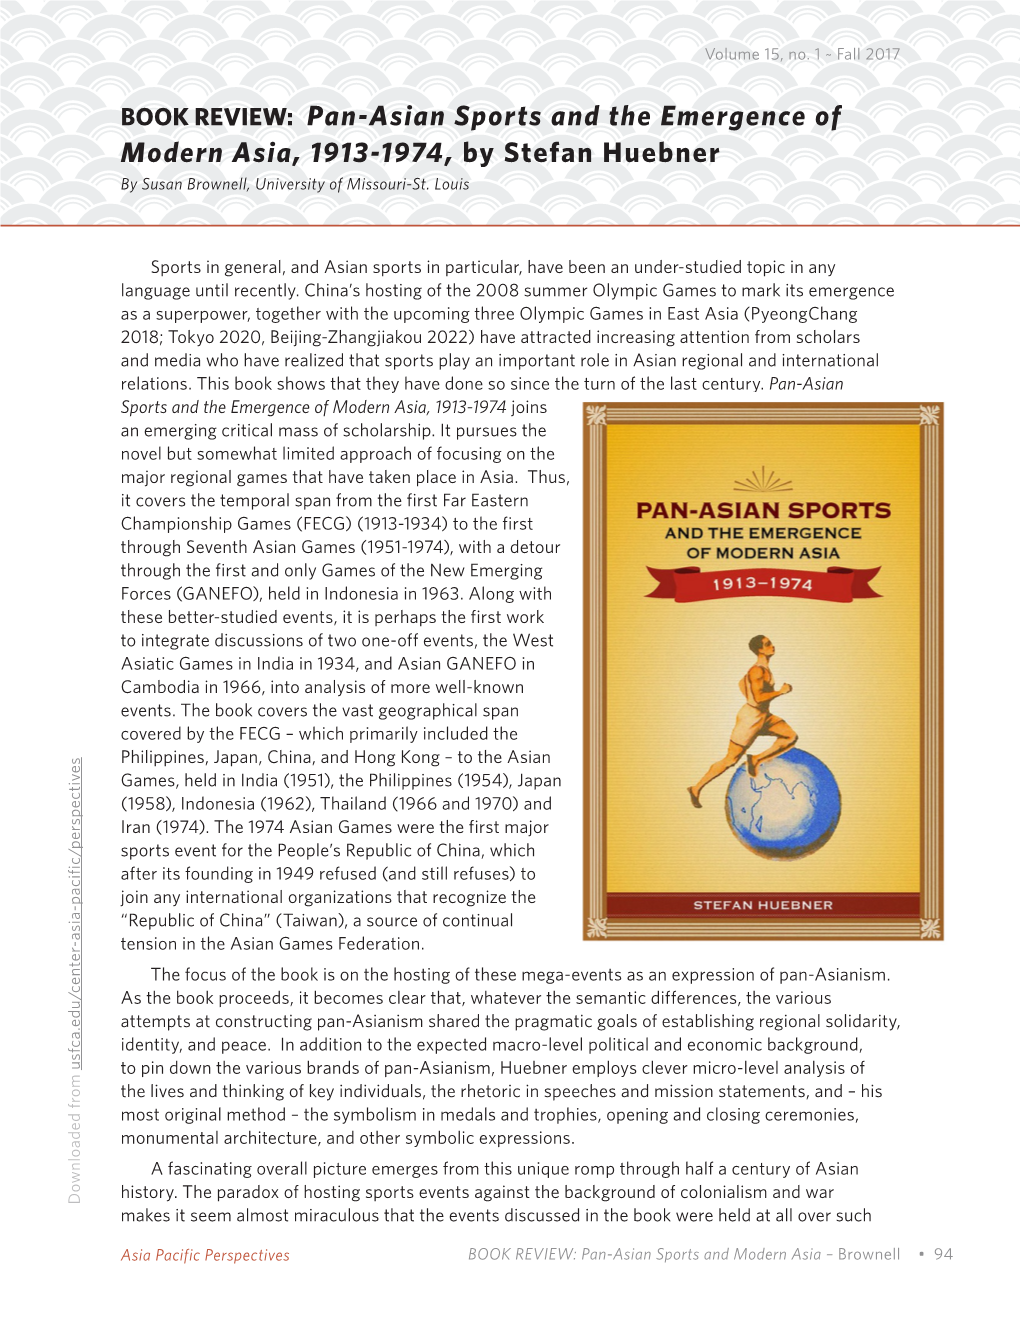 BOOK REVIEW: Pan-Asian Sports and the Emergence of Modern Asia, 1913-1974, by Stefan Huebner by Susan Brownell, University of Missouri-St